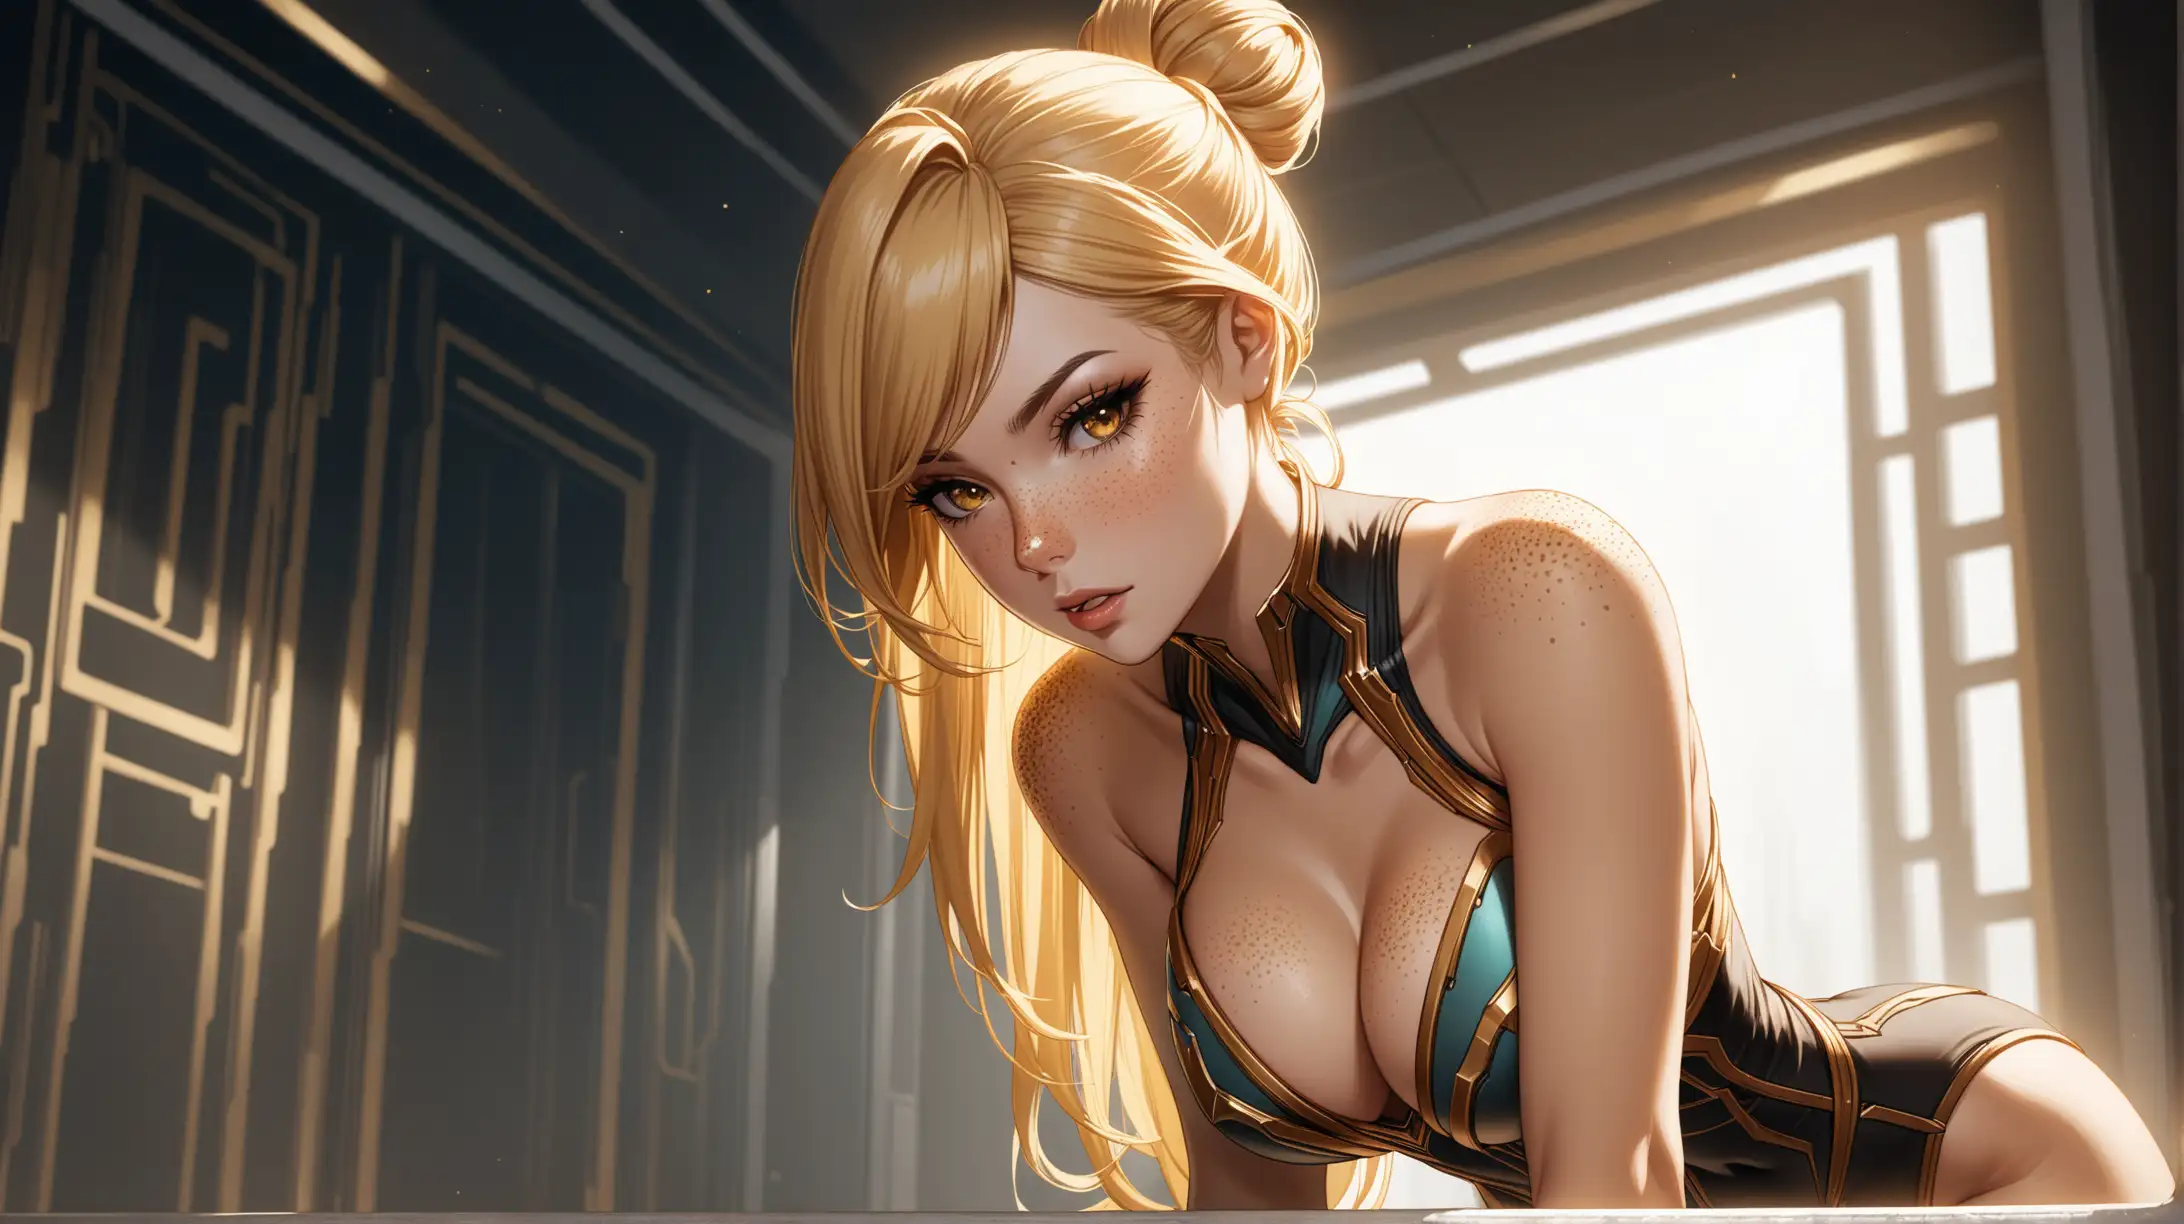 Seductive Woman with WarframeInspired Outfit Captivating Blonde with Enchanting Features